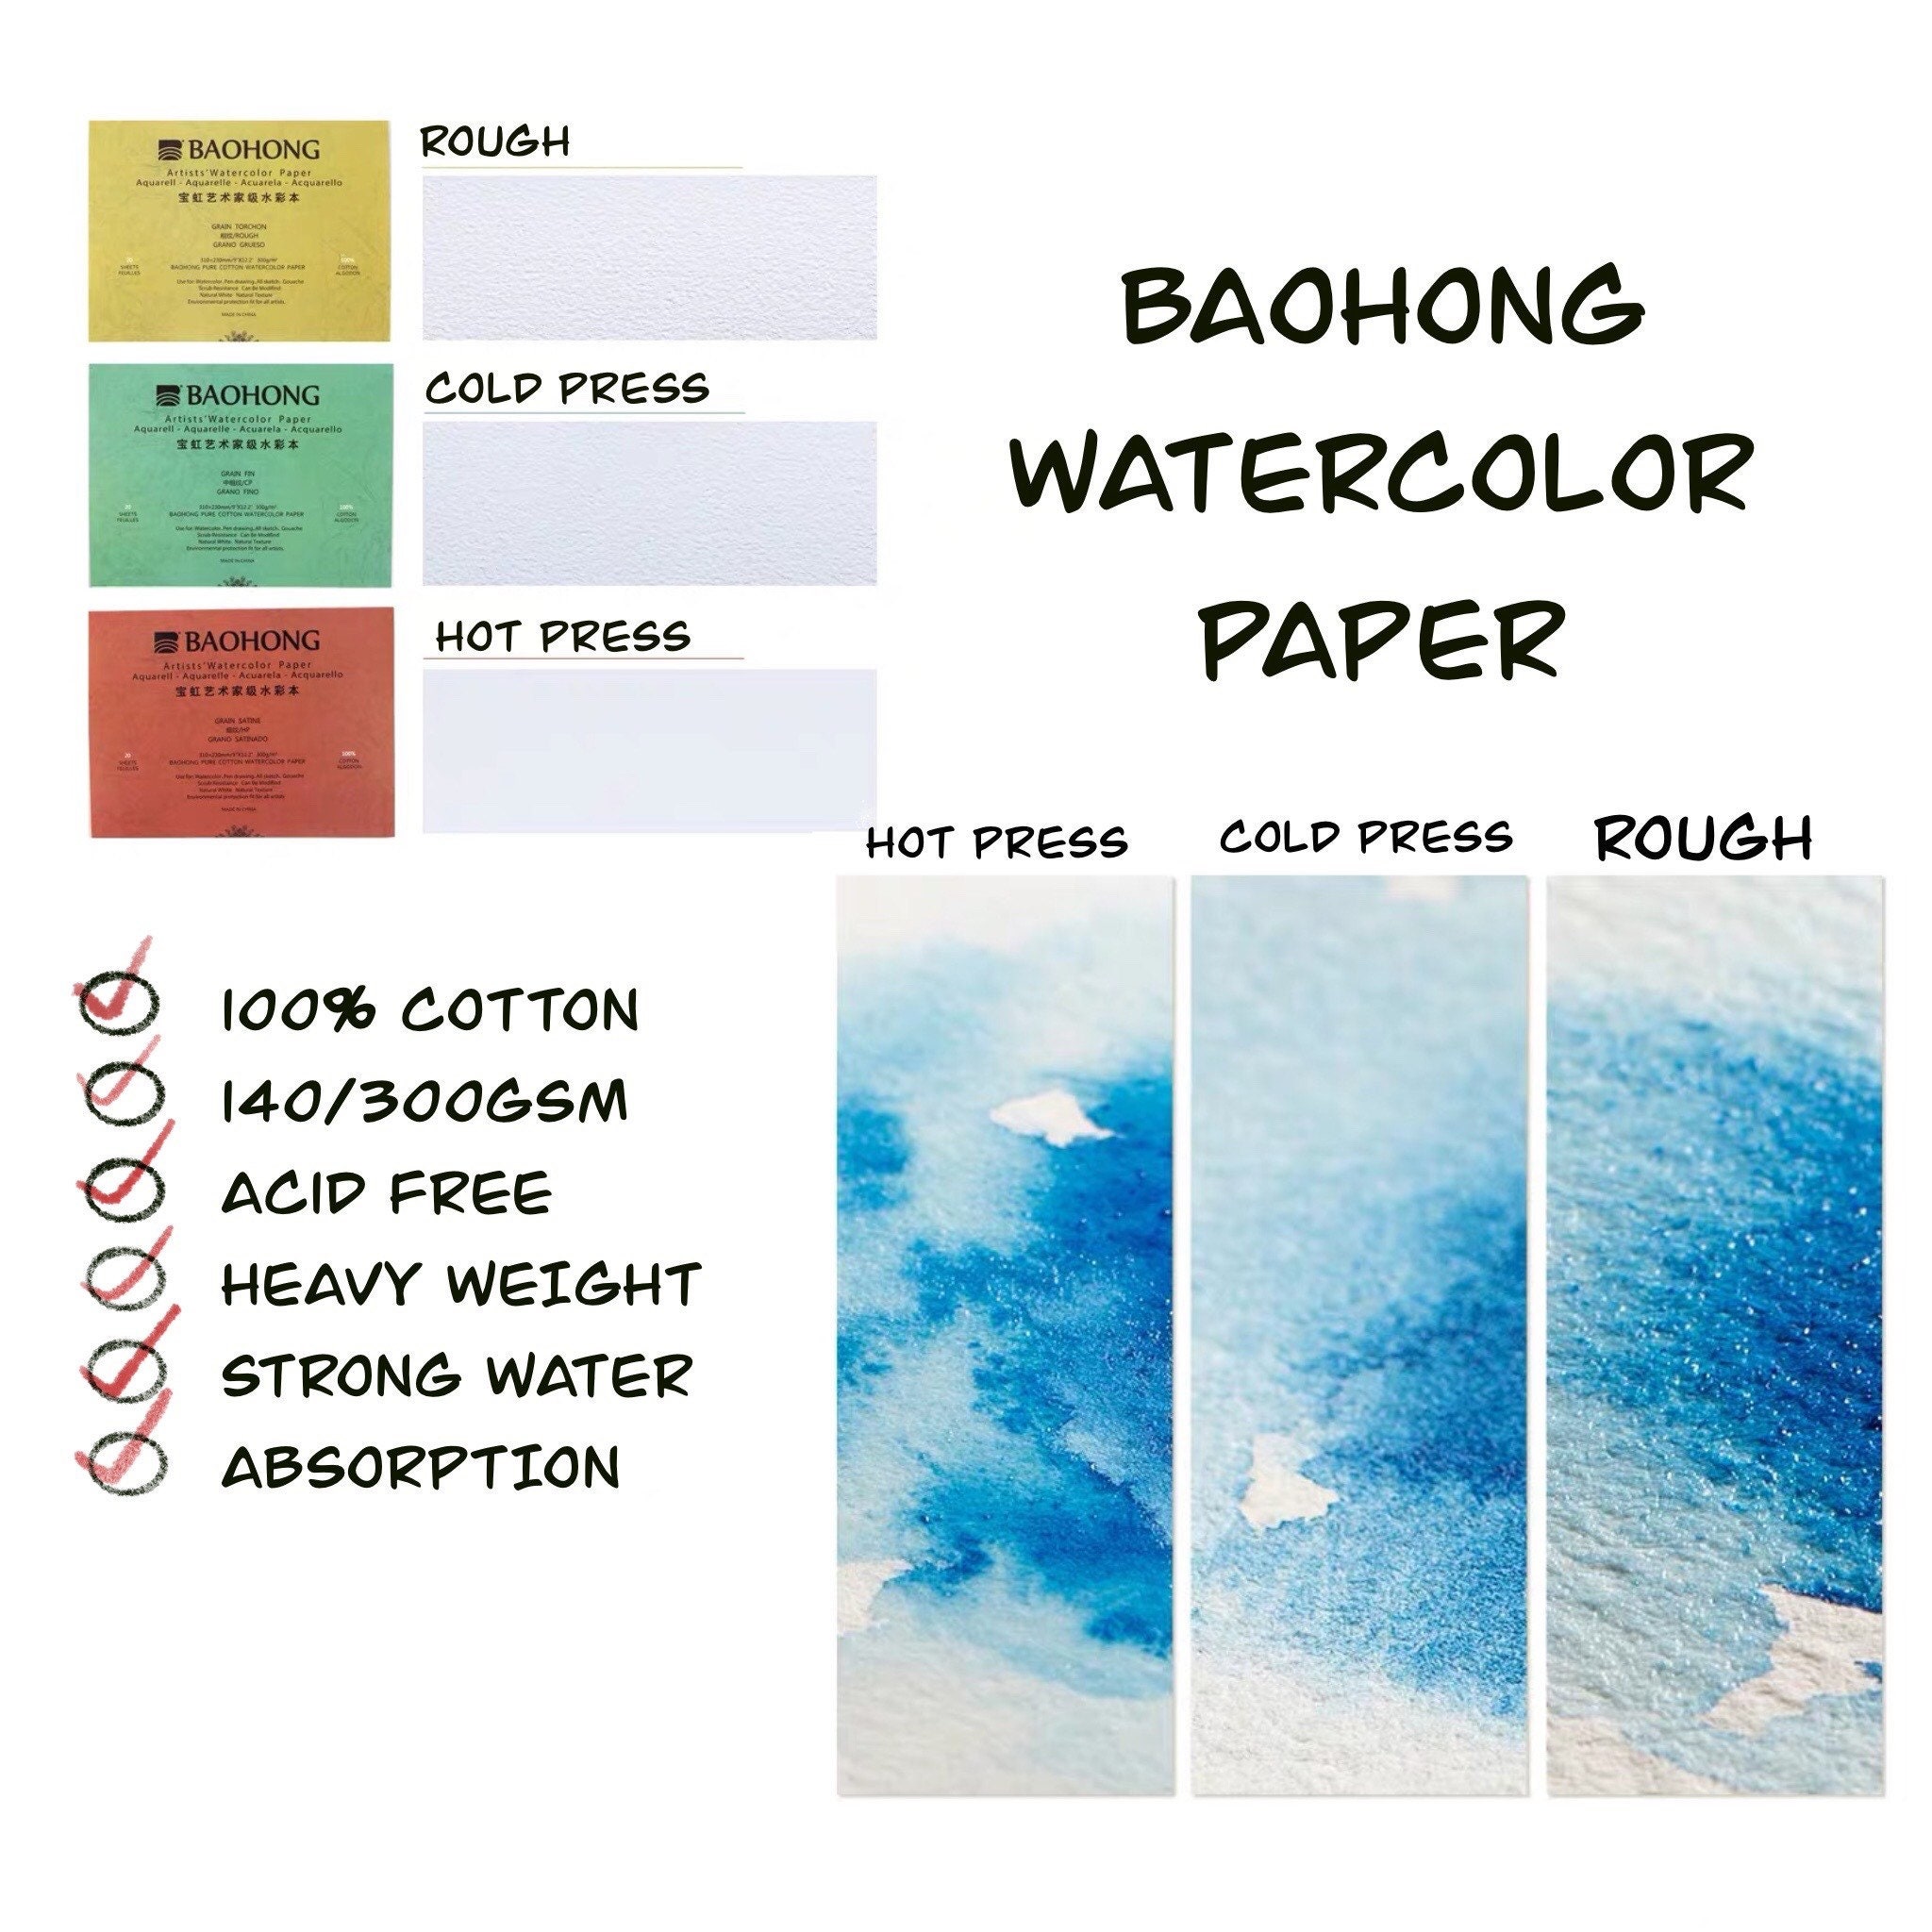 BAOHONG Artists' Watercolor Paper Block, Textured 4.9x7, 20 Sheets, 100%  Cotton, Acid-Free, 140LB/300GSM, Watercolor Art Supplies for Wet, Dry, and